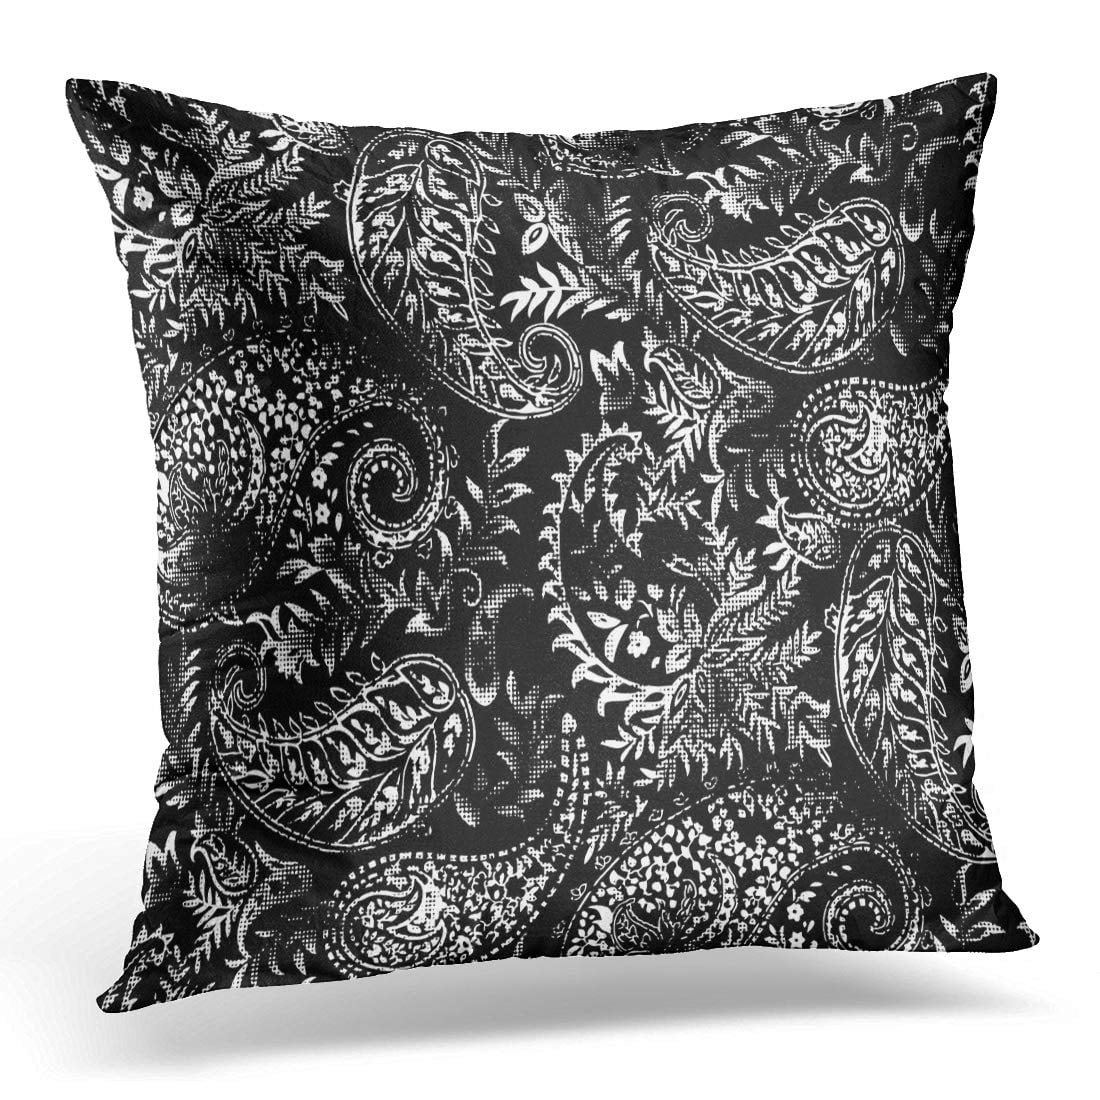 ECCOT Floral Black and White Paisley Flower Pillowcase Pillow Cover ...